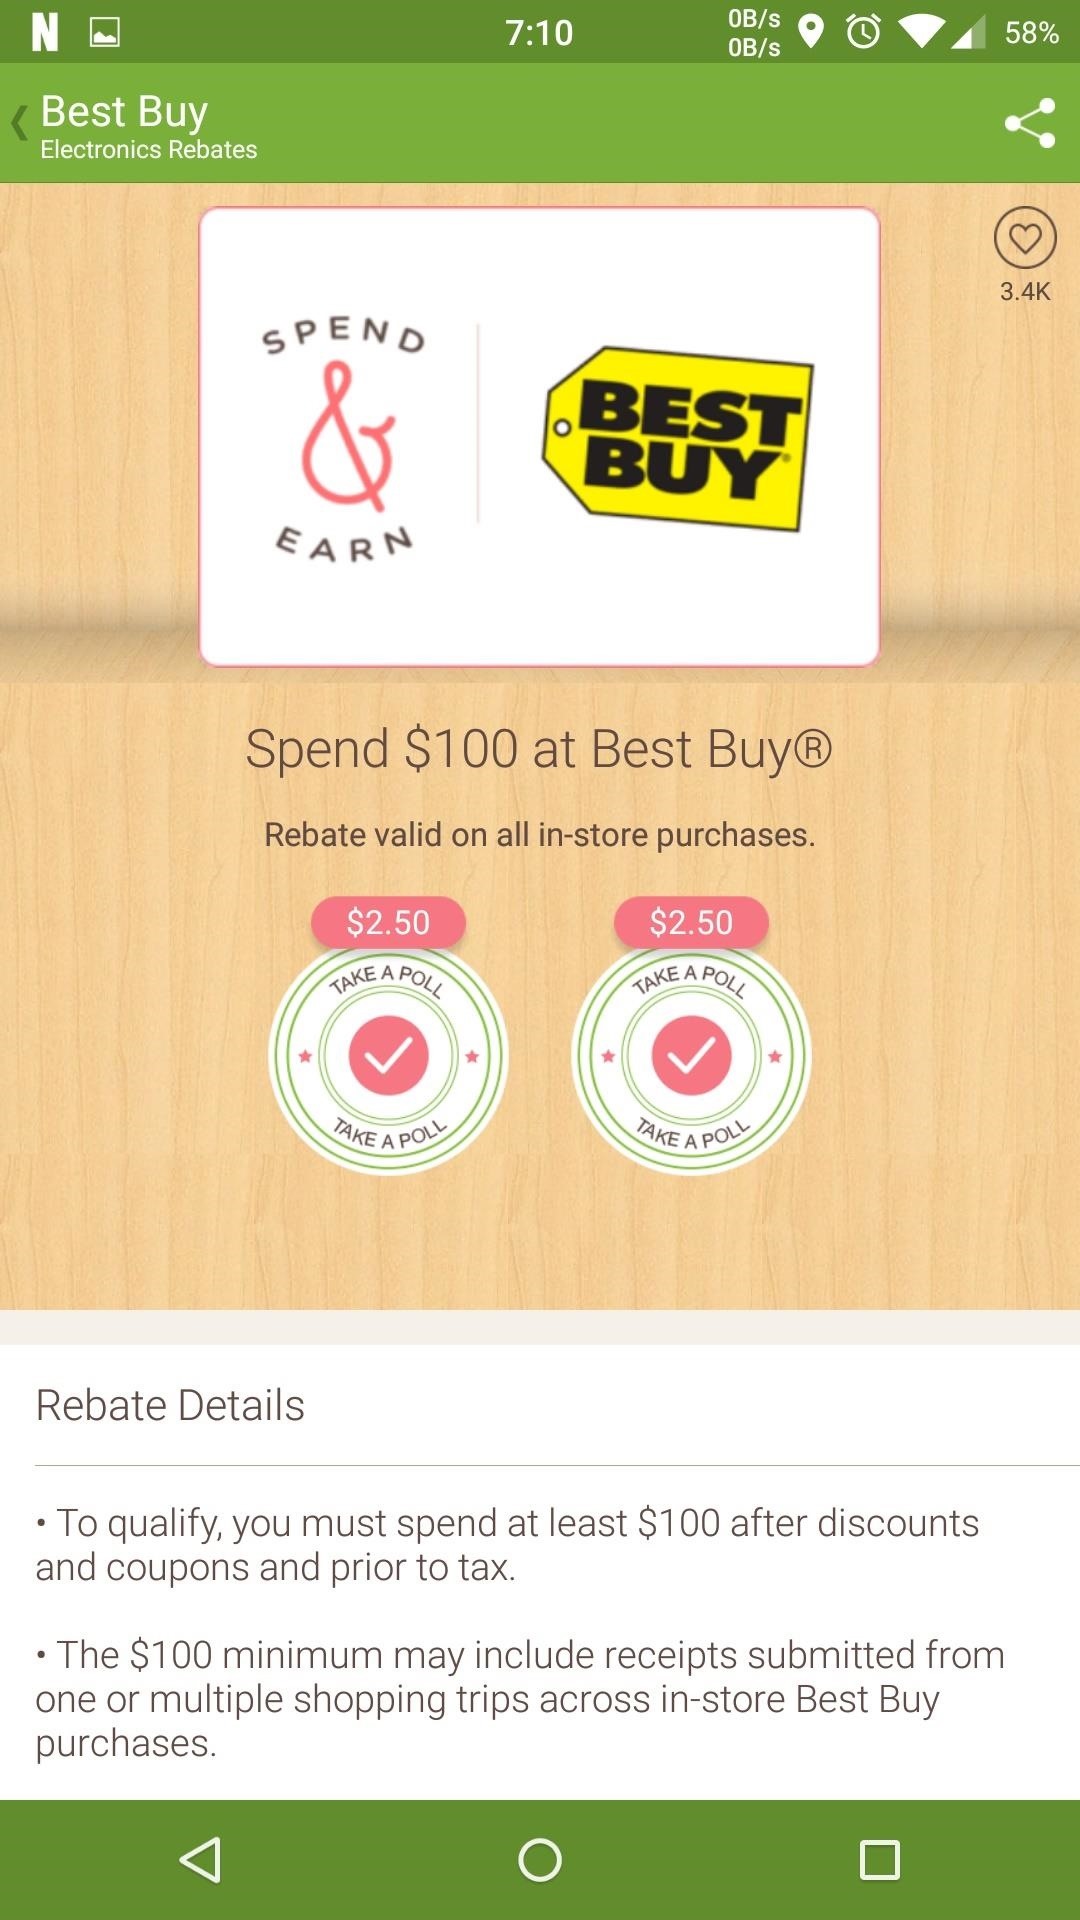 How to Make Money on Android: 15 Apps That Give Rewards & Cash Back for Doing Almost Nothing